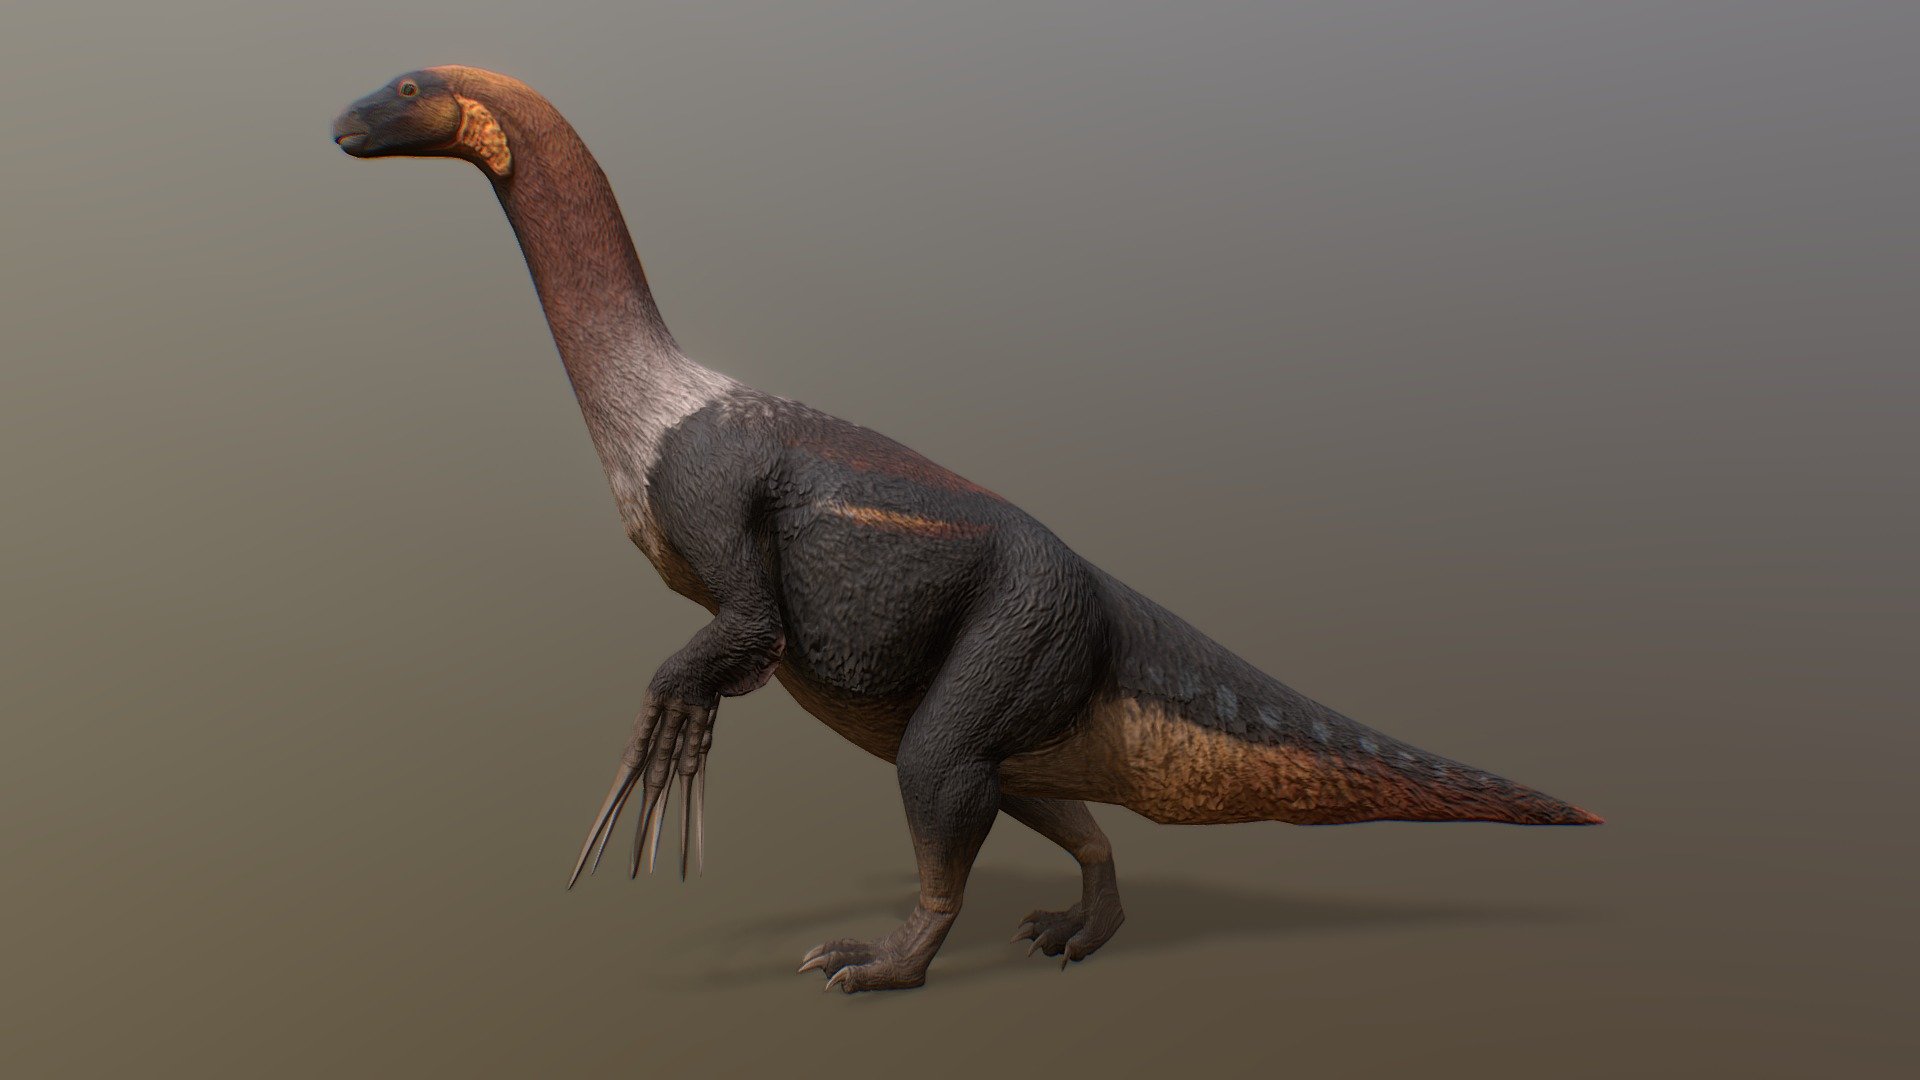 Rigged Therizinosaurus model. There was a walk animation but sketchfab had trouble processing it.
This rig is only compatible with Blender

how to use/ help with problems: https://docs.google.com/document/d/1pAuzCChZEtseL4V-lF4oACmg1PvQQ3QQmjAJRwh_Nss/edit?usp=sharing

If any other help is needed you can dm me about it on twitter: https://twitter.com/cafnir

If you want to support me in making more models donations are appreciated: https://ko-fi.com/cafnir - Therizinosaurus - Buy Royalty Free 3D model by cafnir 3d model